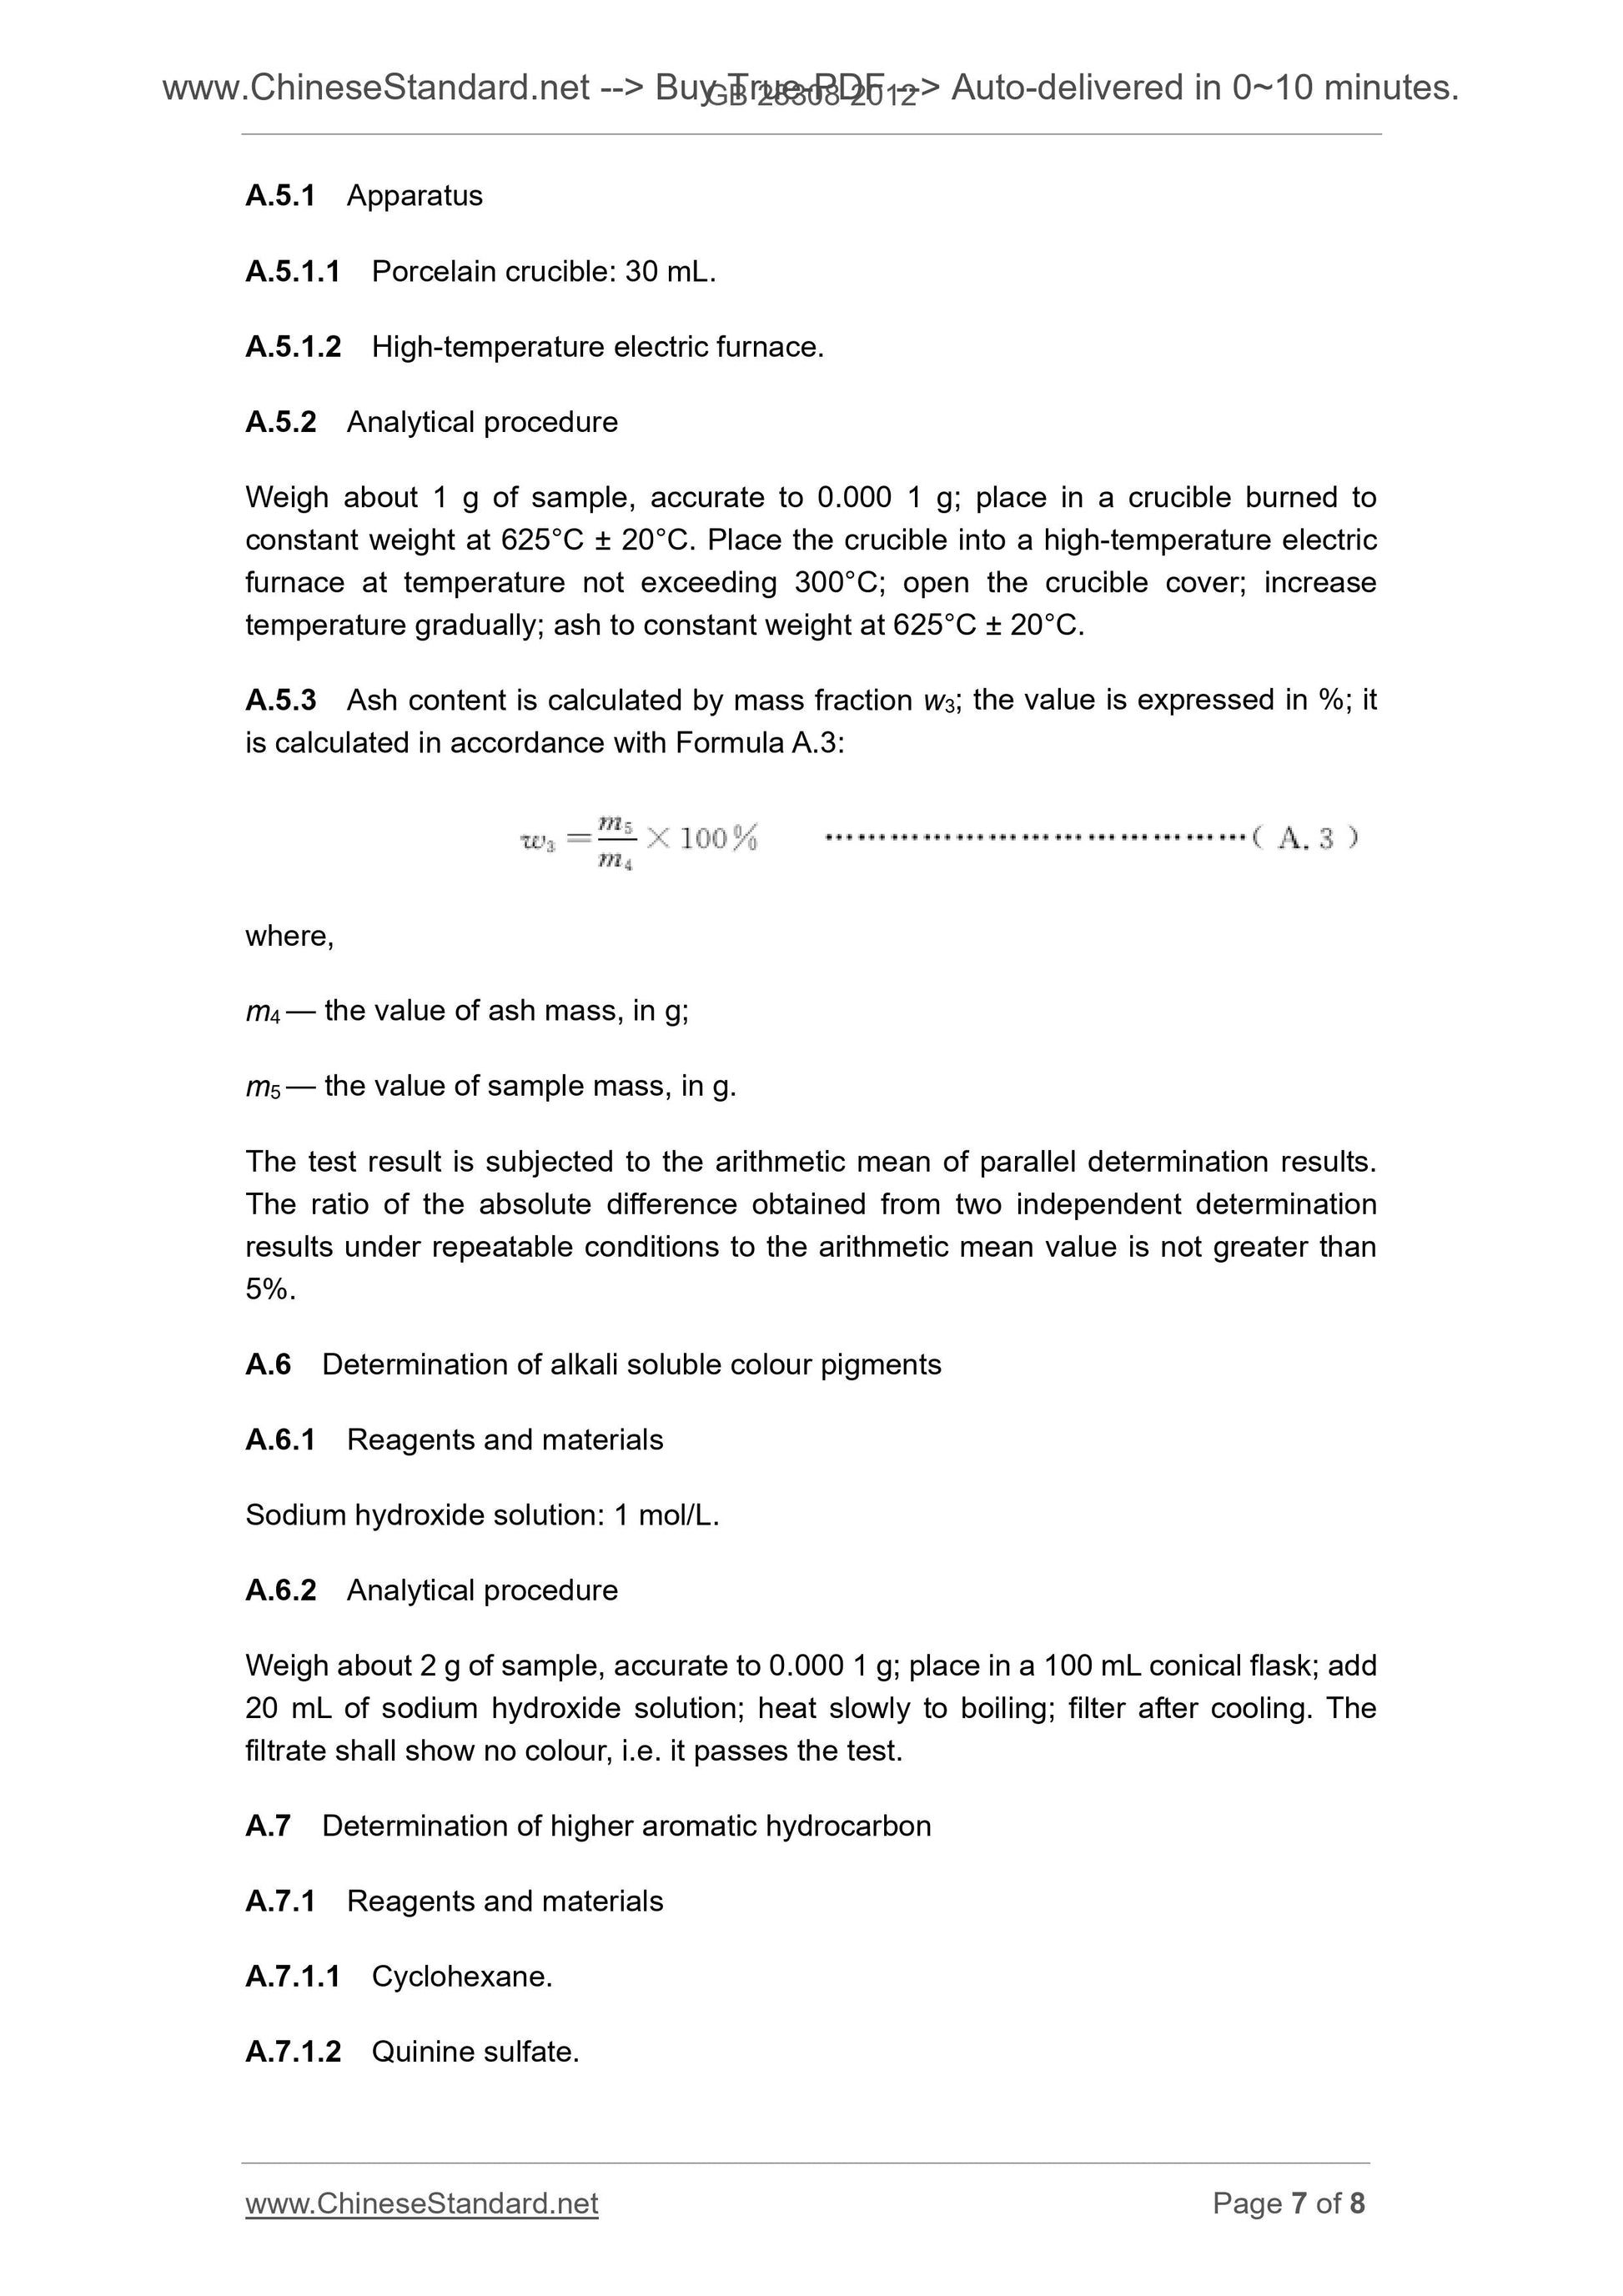 GB 28308-2012 Page 4